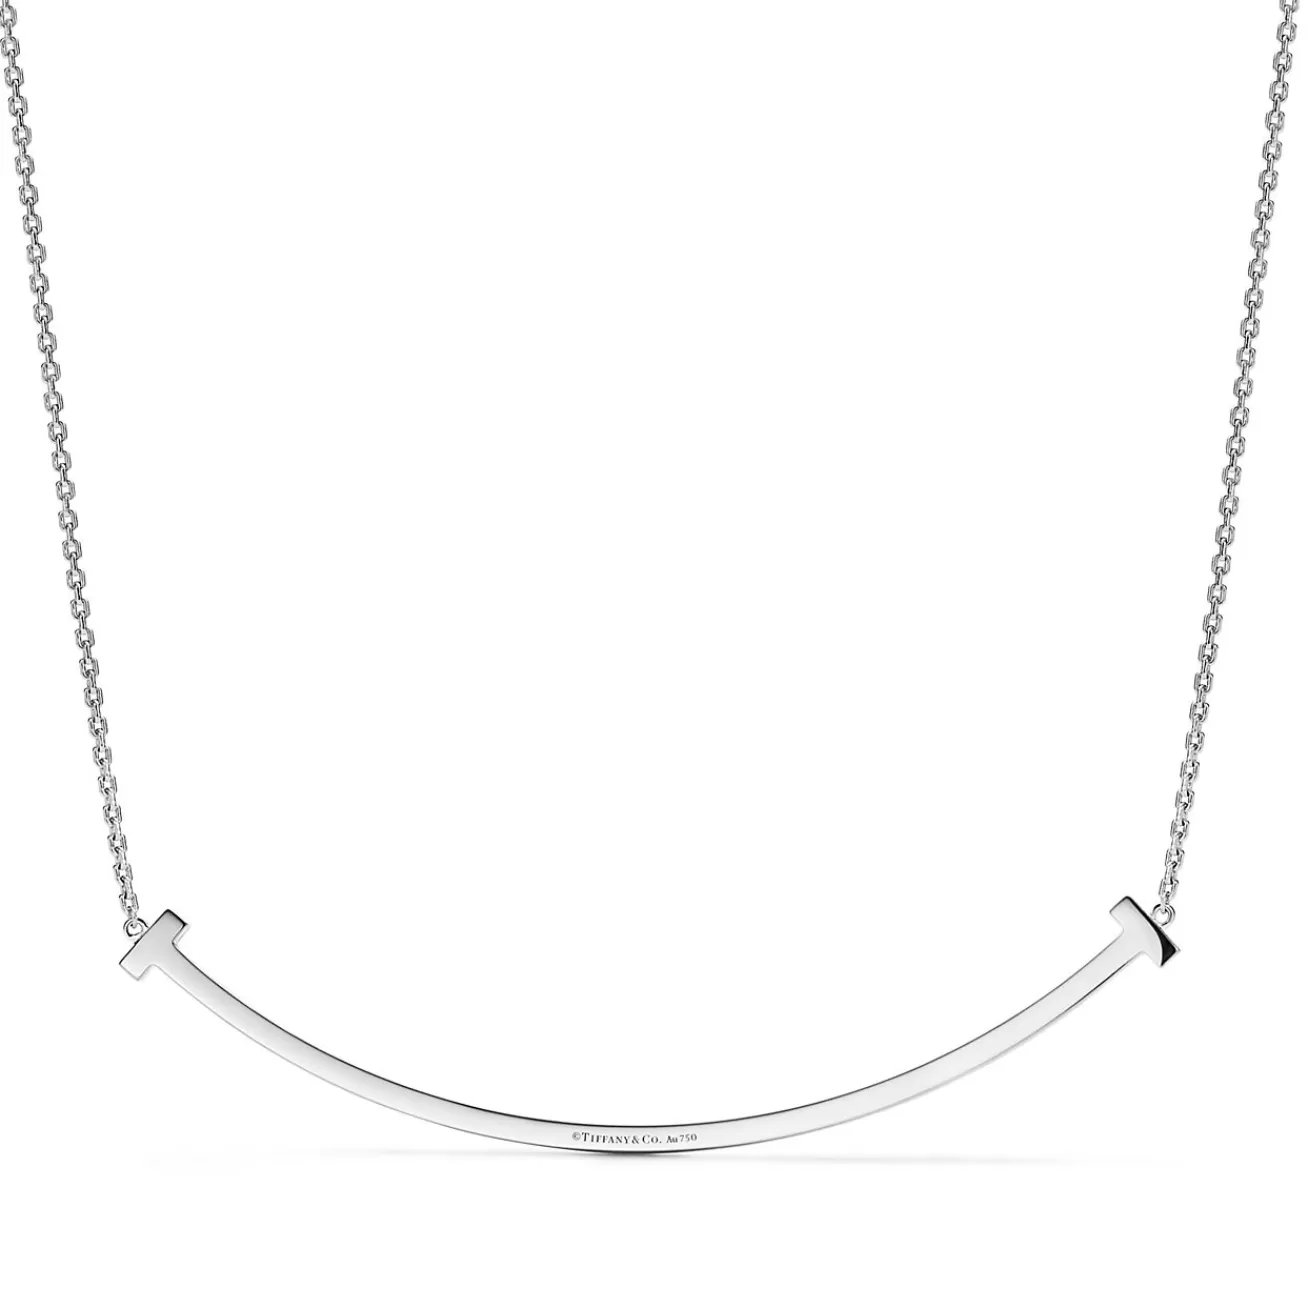 Tiffany & Co. Tiffany T extra large smile pendant in 18k white gold with diamonds. | ^ Necklaces & Pendants | Men's Jewelry